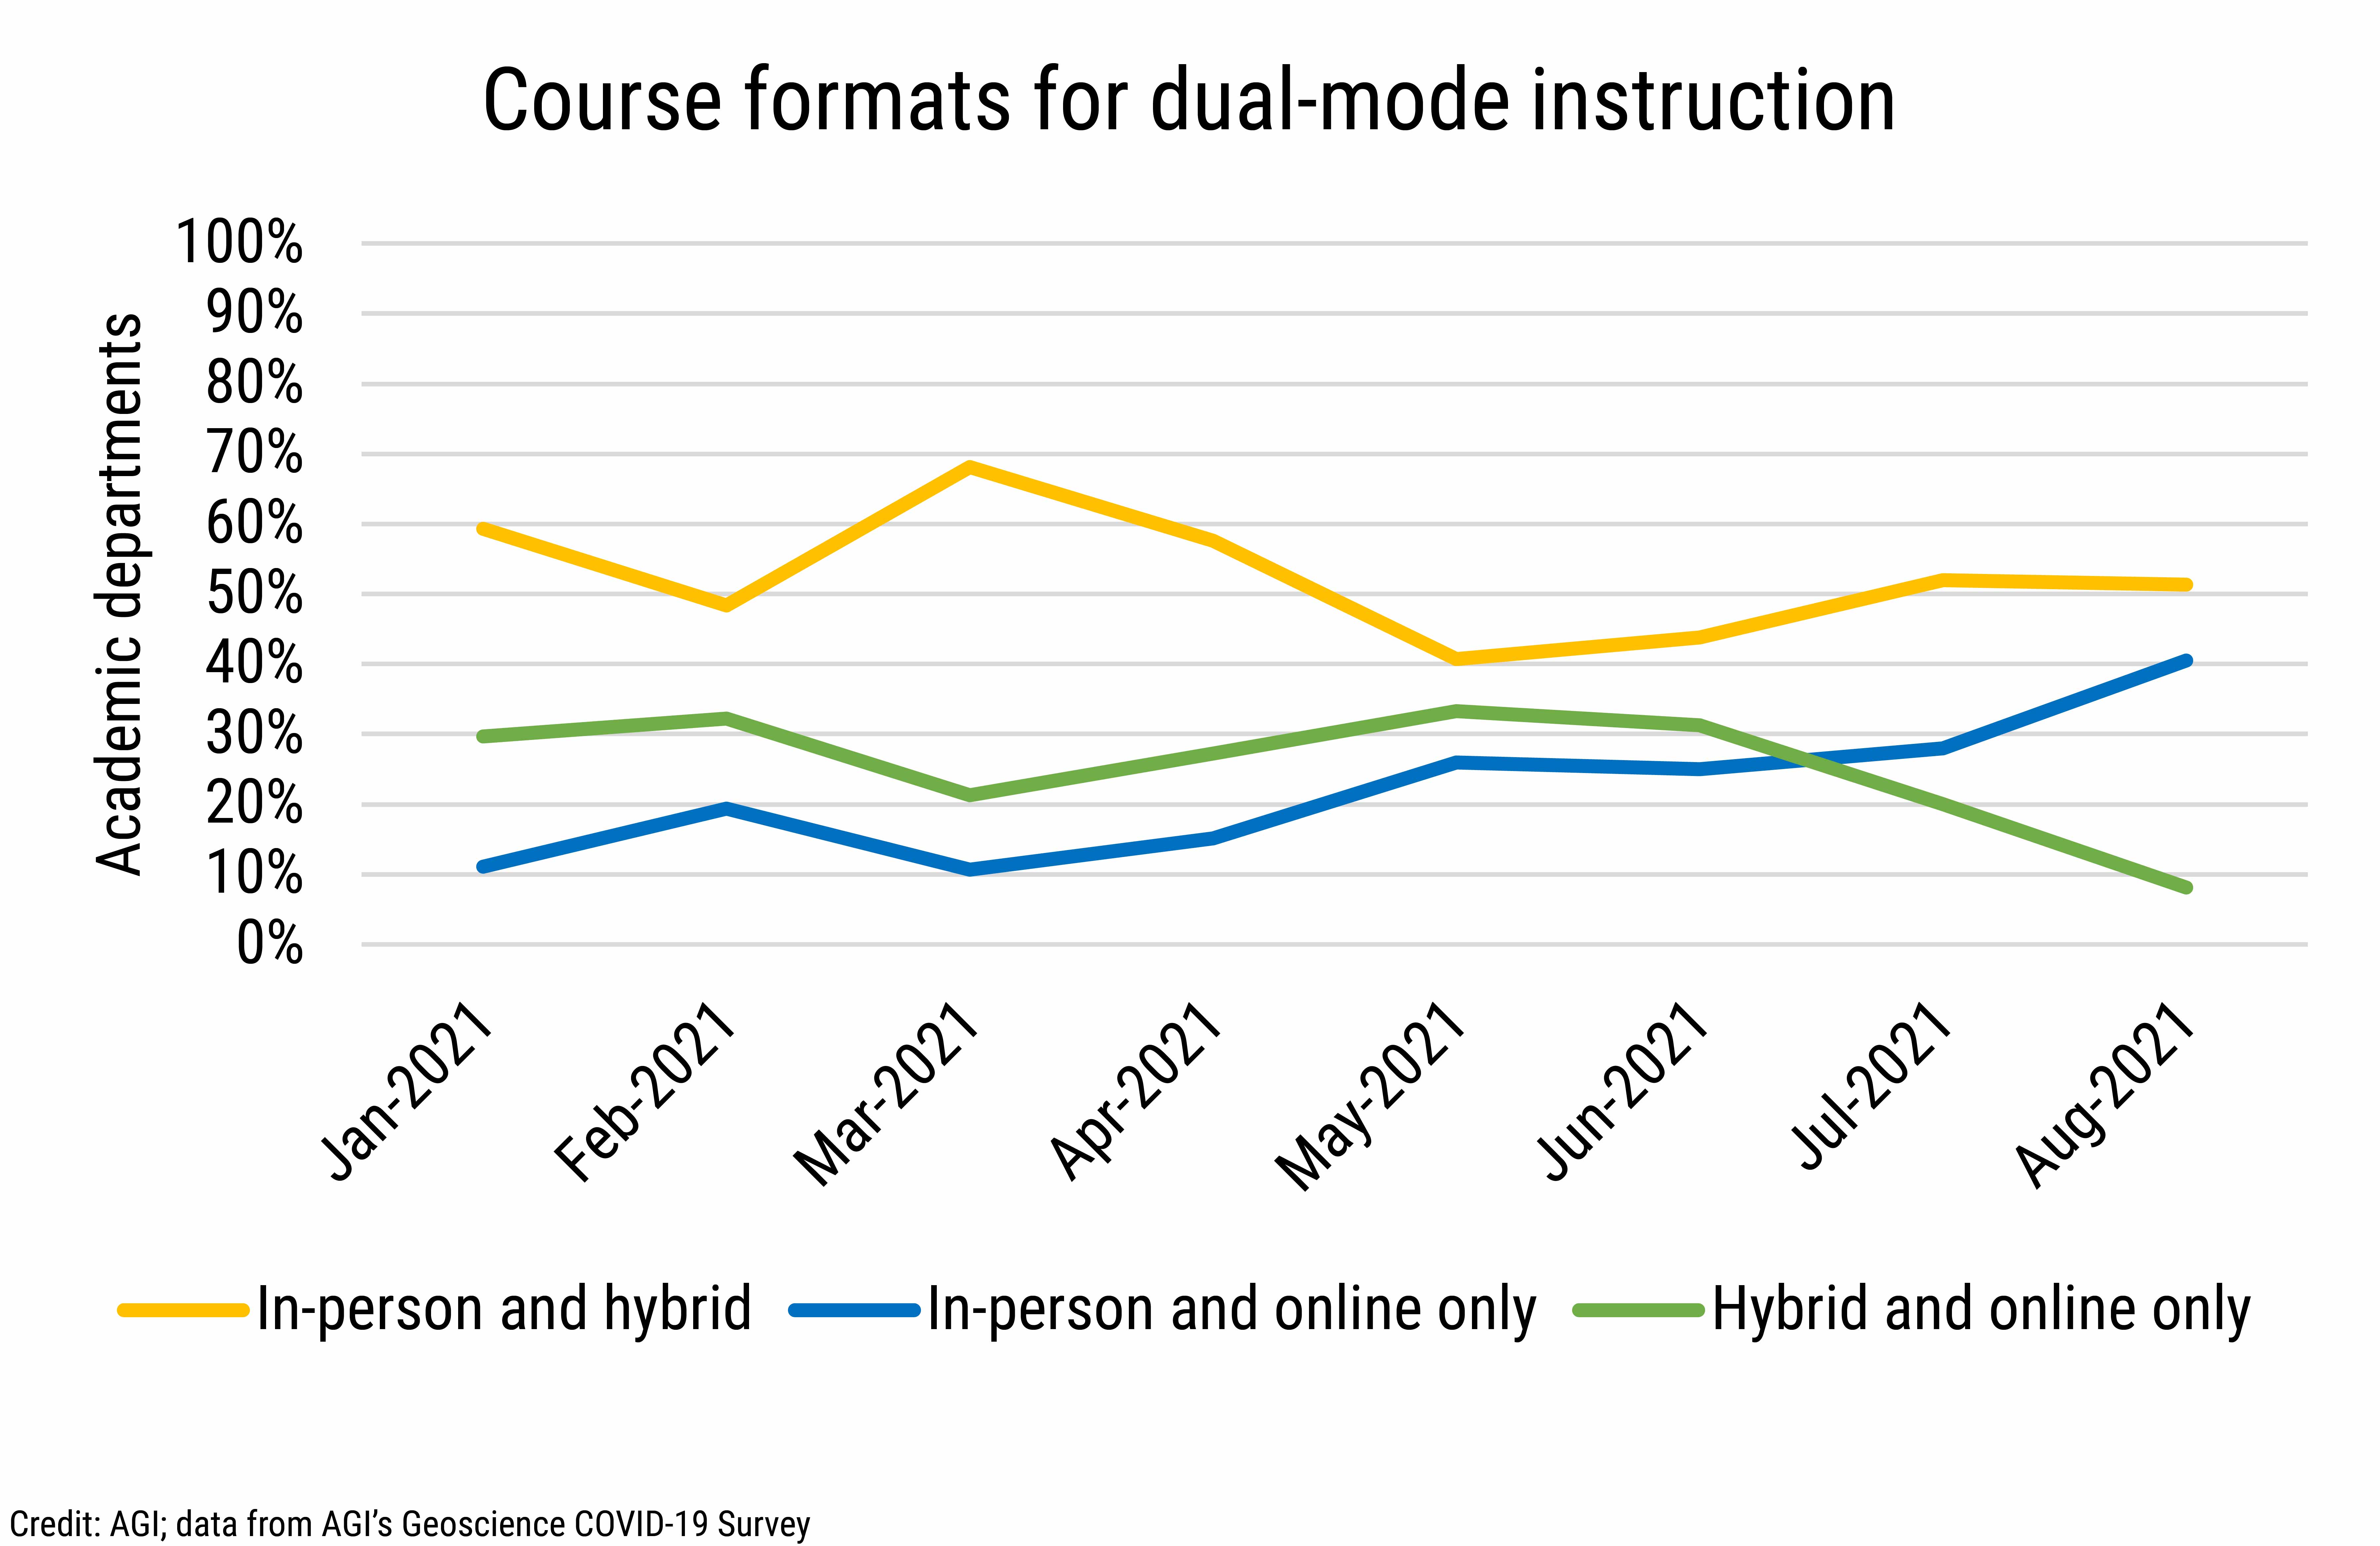 DB_2021-027 chart 03: Course instructional formats for dual-mode instruction (Credit: AGI; data from AGI&#039;s Geoscience COVID-19 Survey)